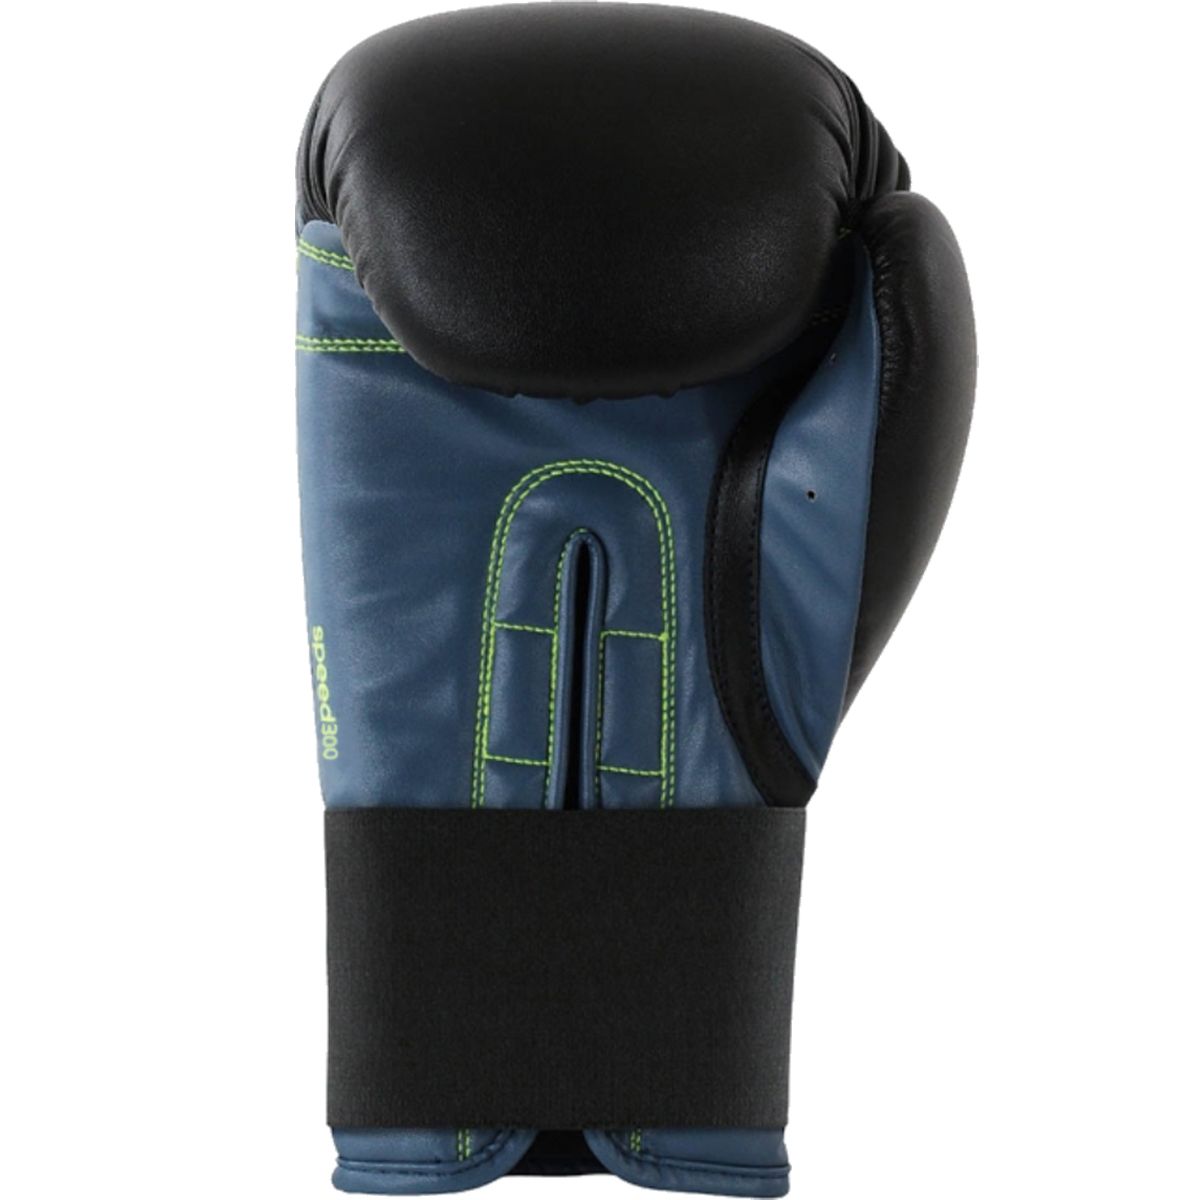 Speed 300 Boxing Gloves